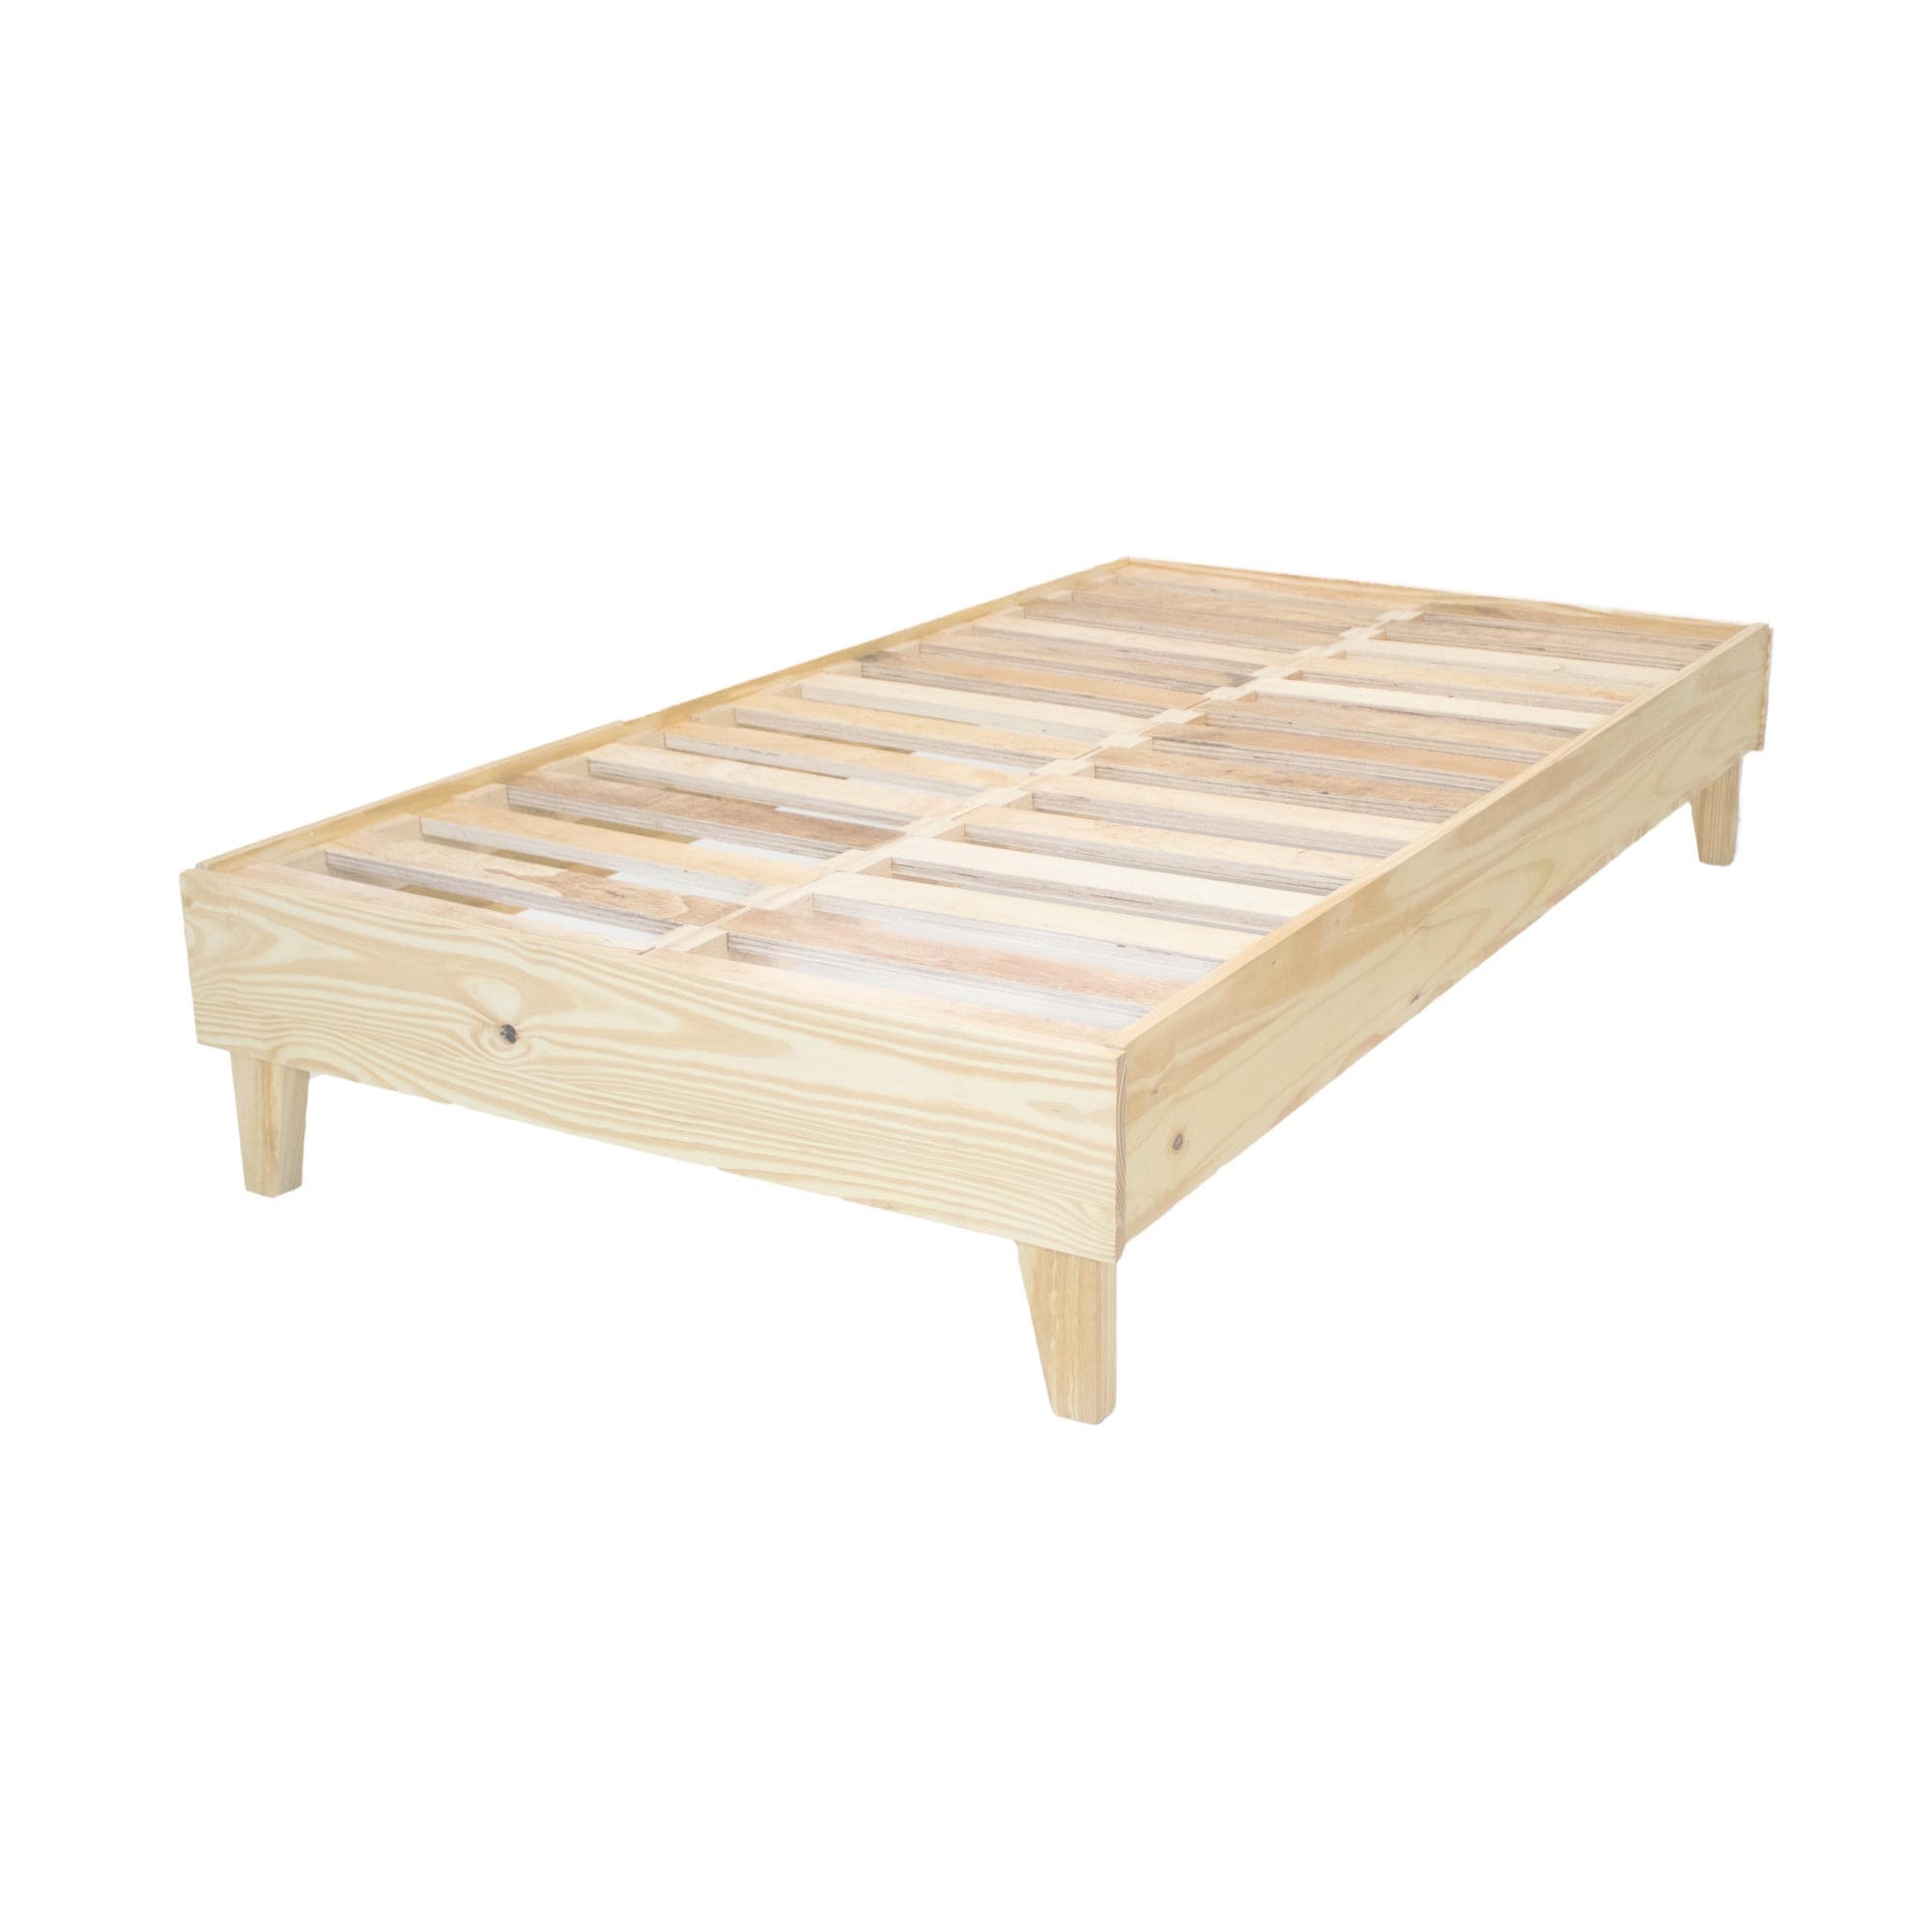 Extra Long Bed Frame In The Beds, Twin Xl Bed Foundation